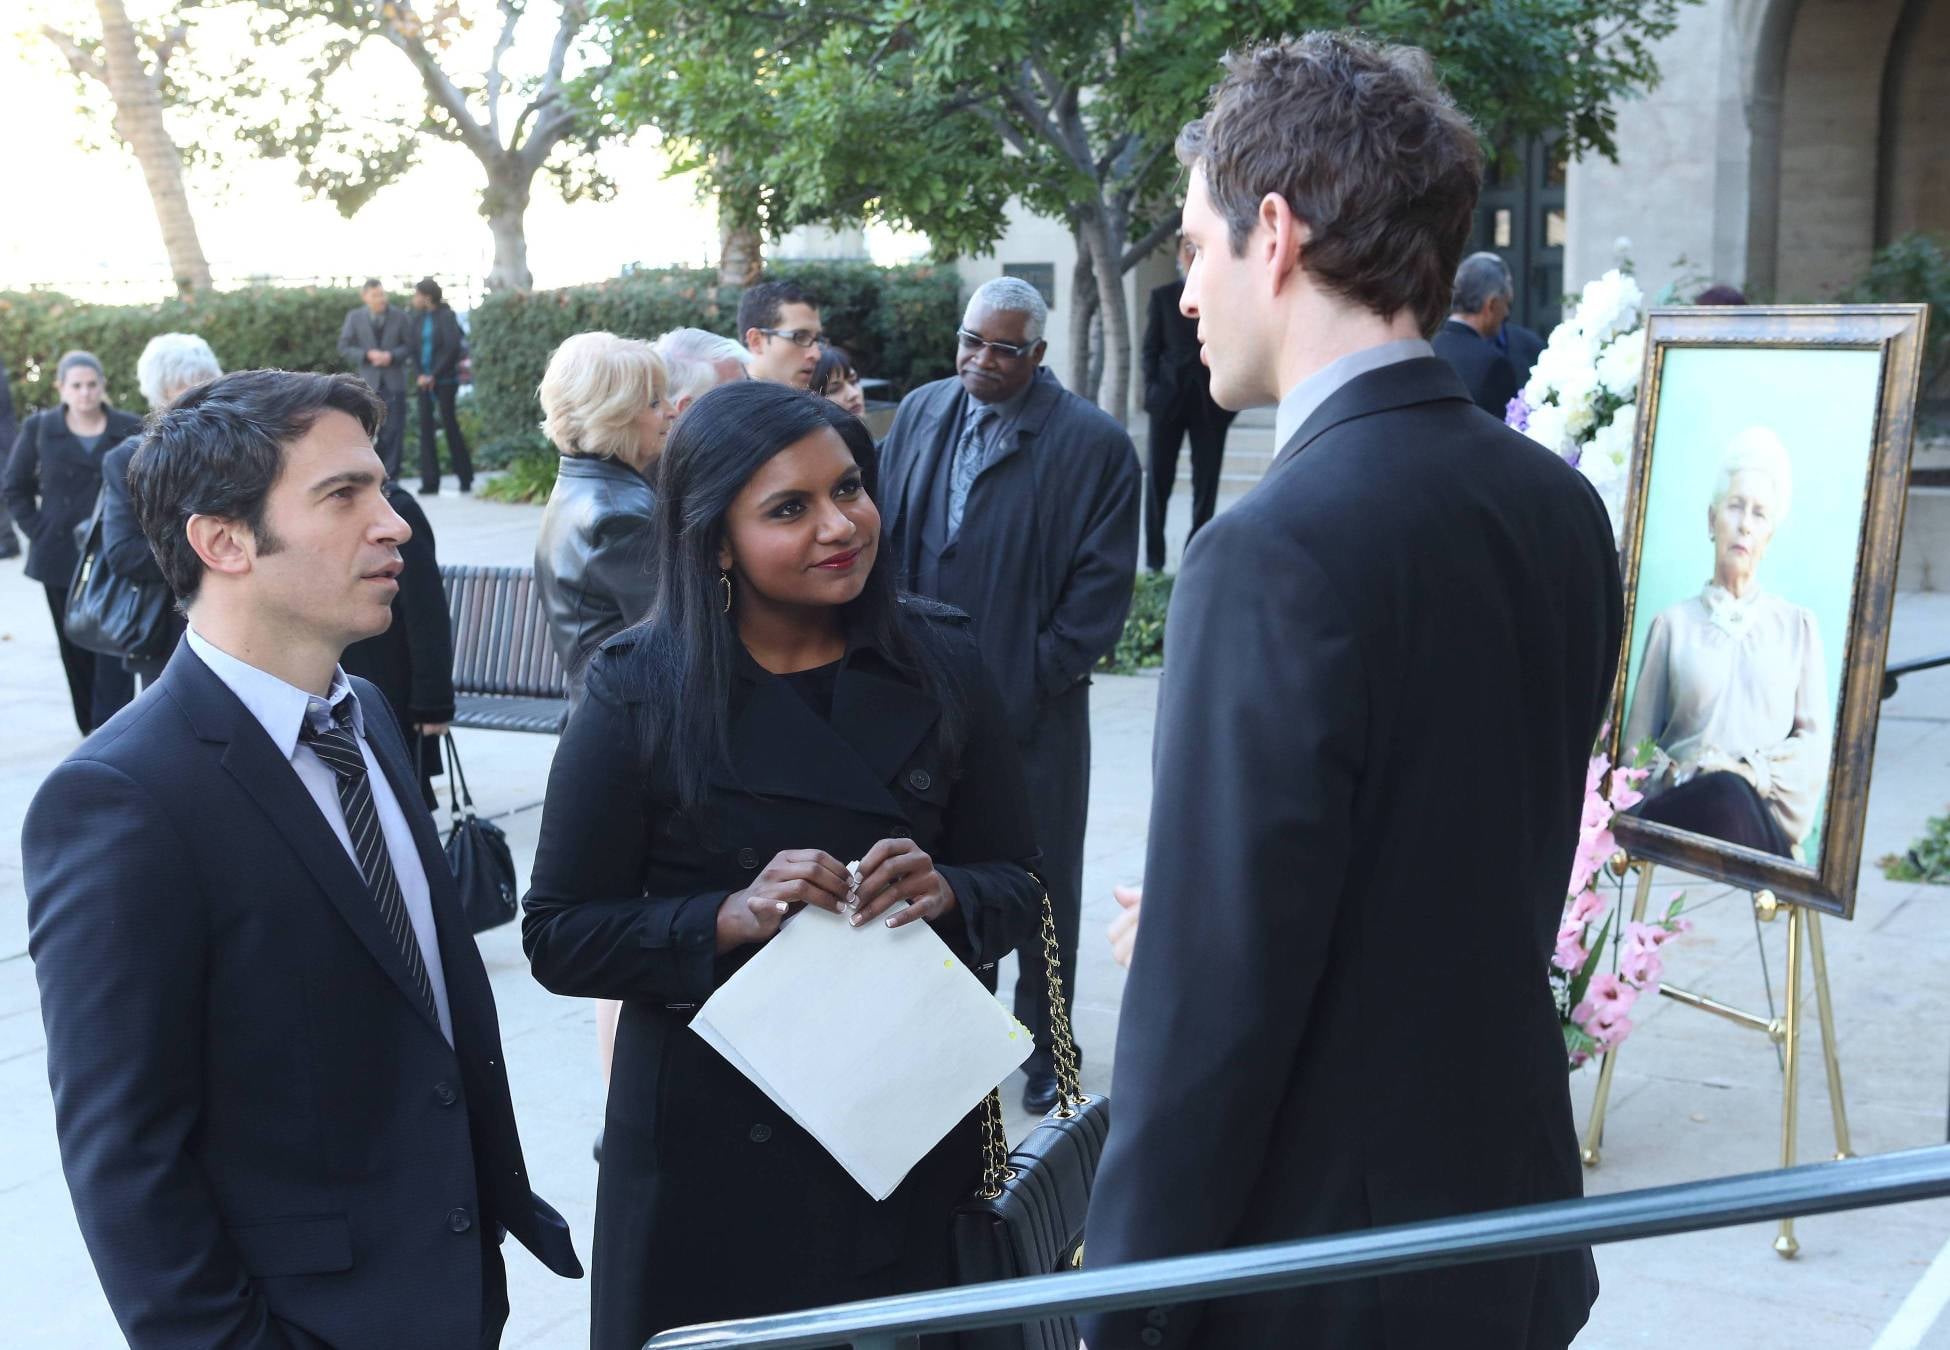 Danny (Chris Messina) and Mindy (Mindy Kaling) attend Cliff's (Glenn Howerton) grandmother's funeral.